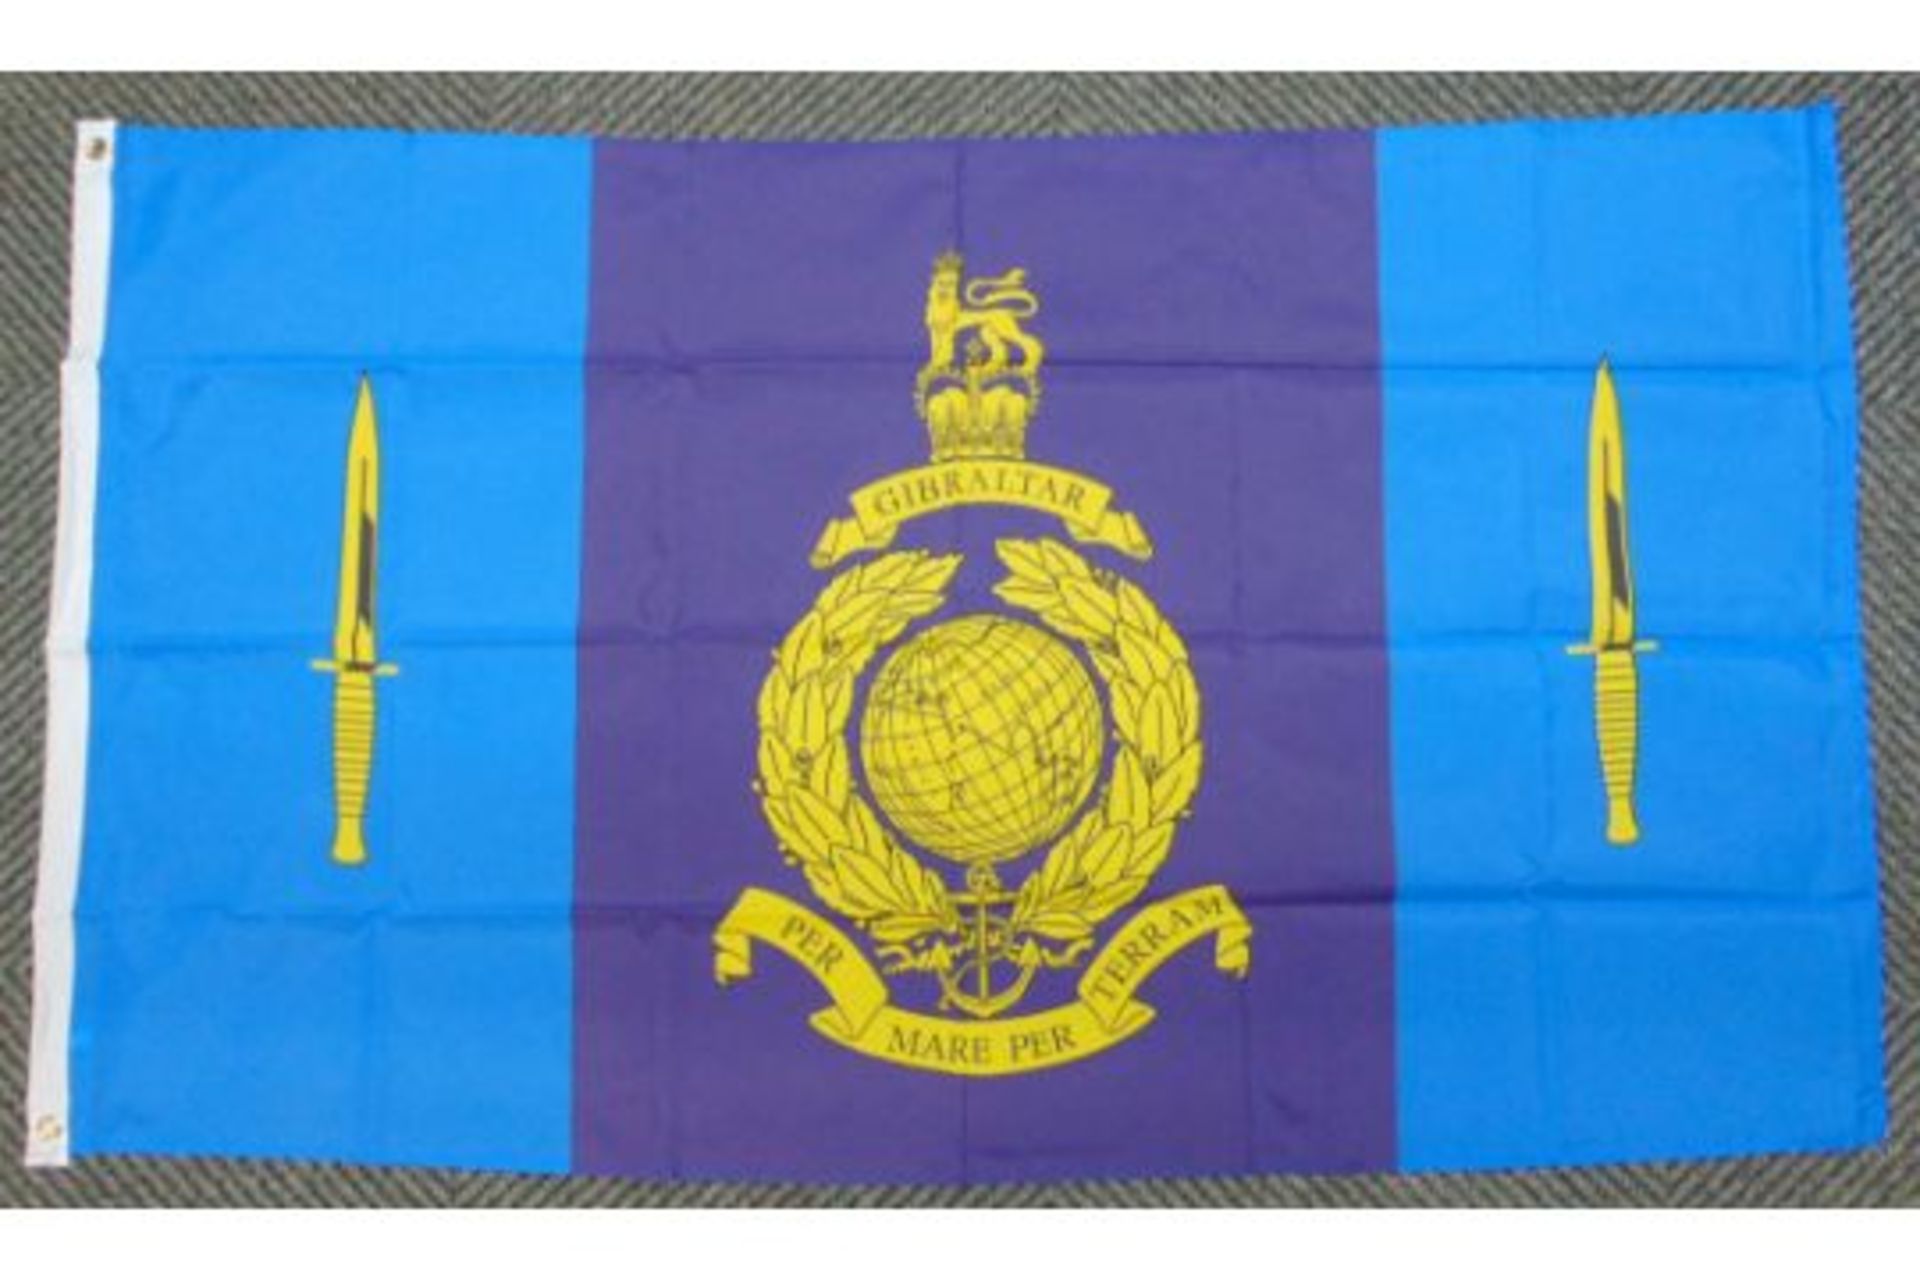 40 Commando Royal Marines Flag - 5ft x 3ft with Metal Eyelets.